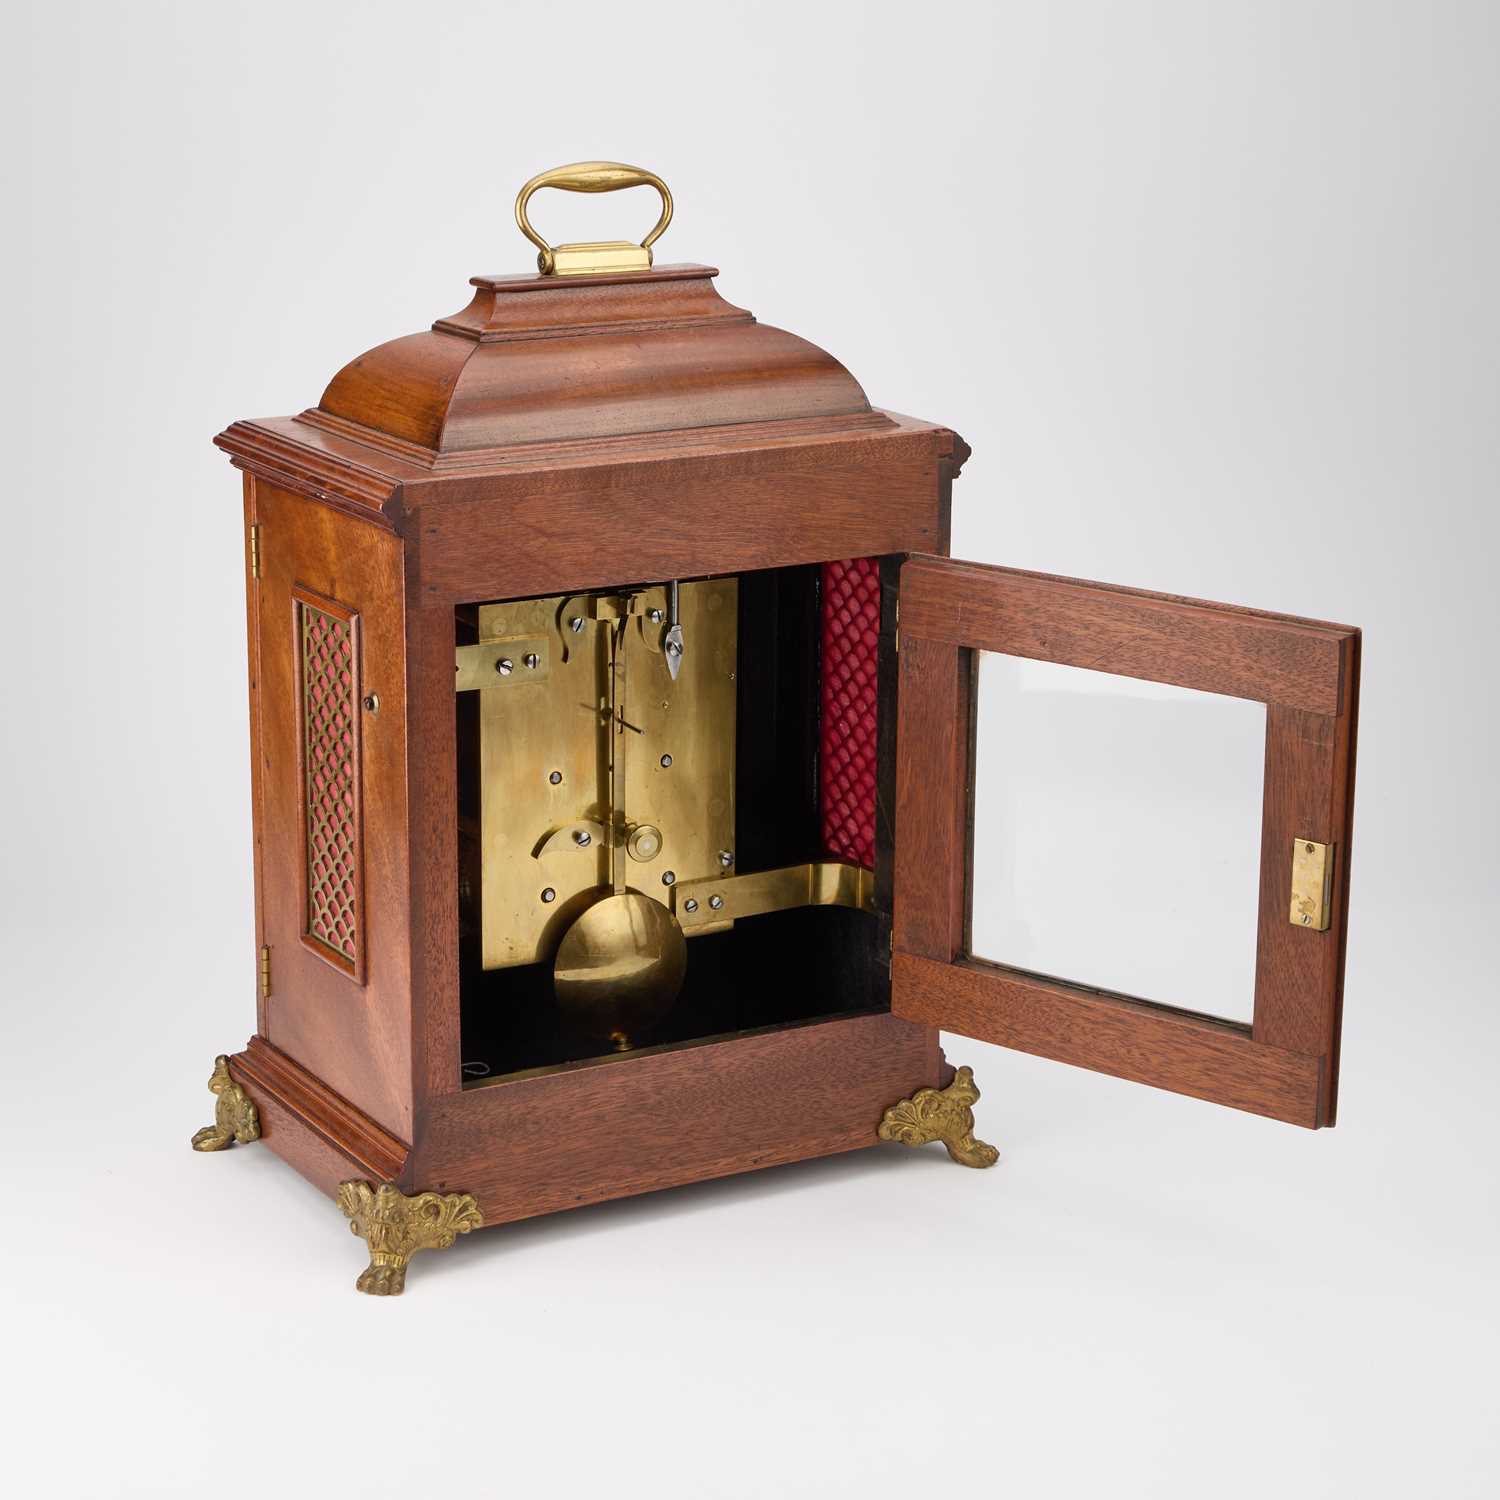 AN 18TH CENTURY STYLE MAHOGANY DOUBLE FUSEE TABLE CLOCK, SIGNED SAMUEL STONE LONDON - Image 2 of 3